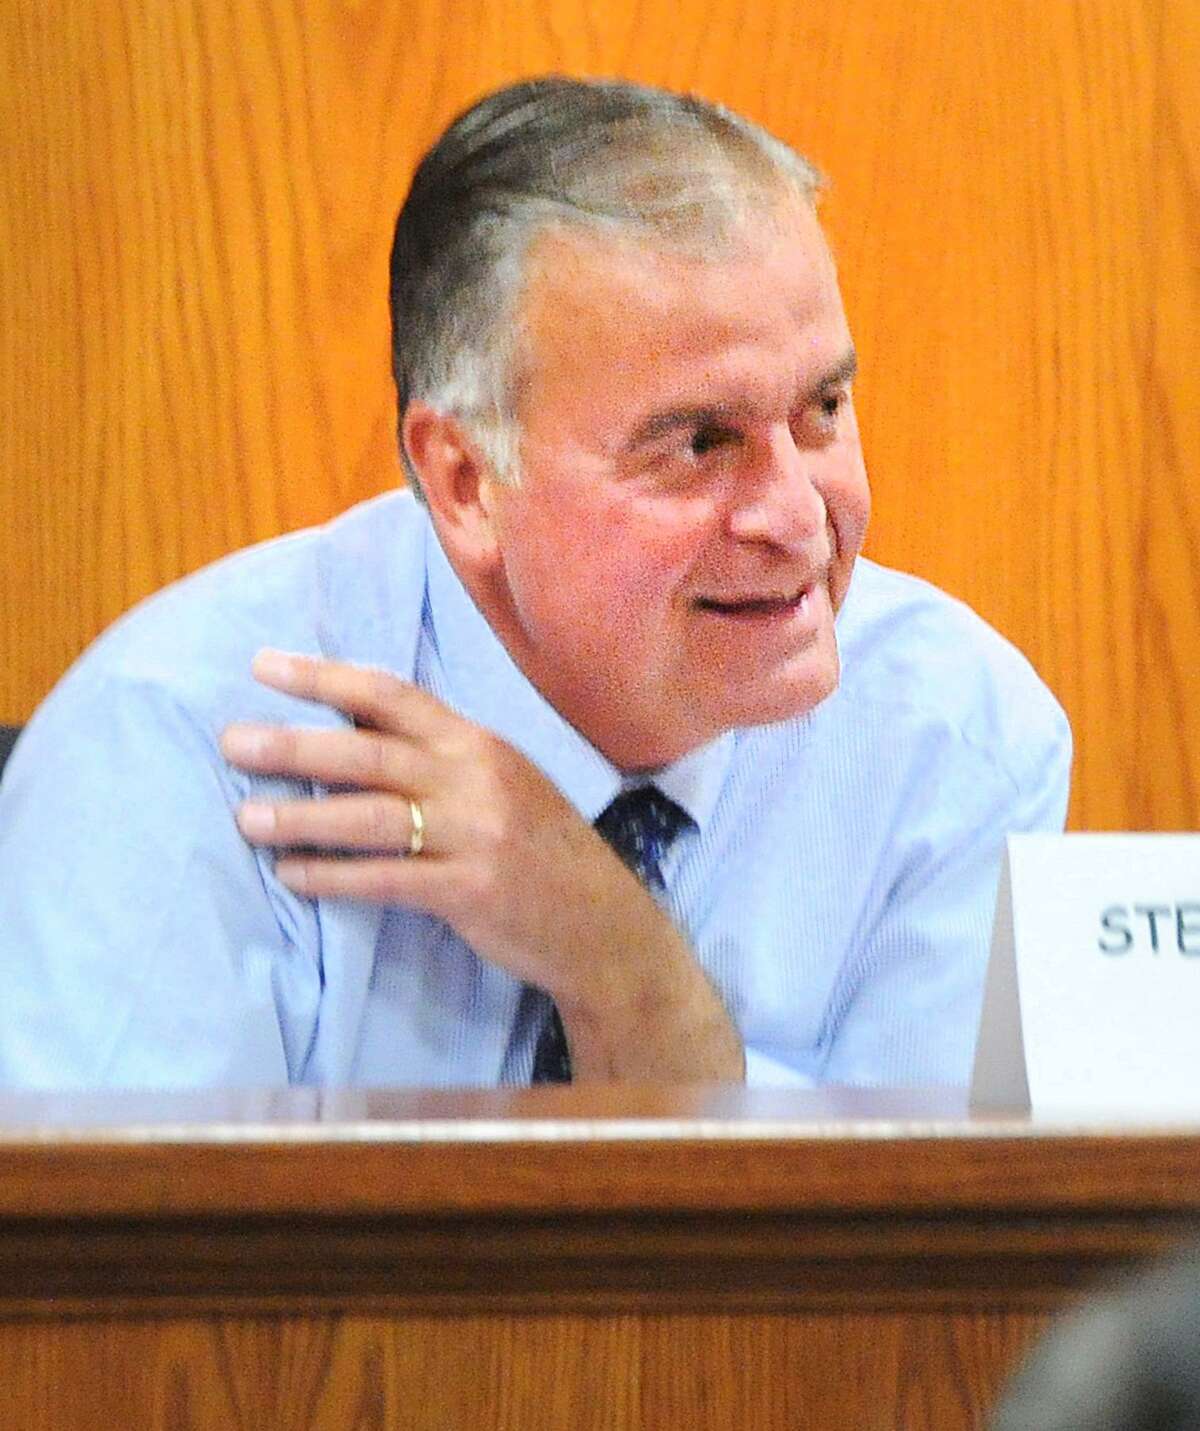 Stephen Meskers is the new state representative in the 150 District.